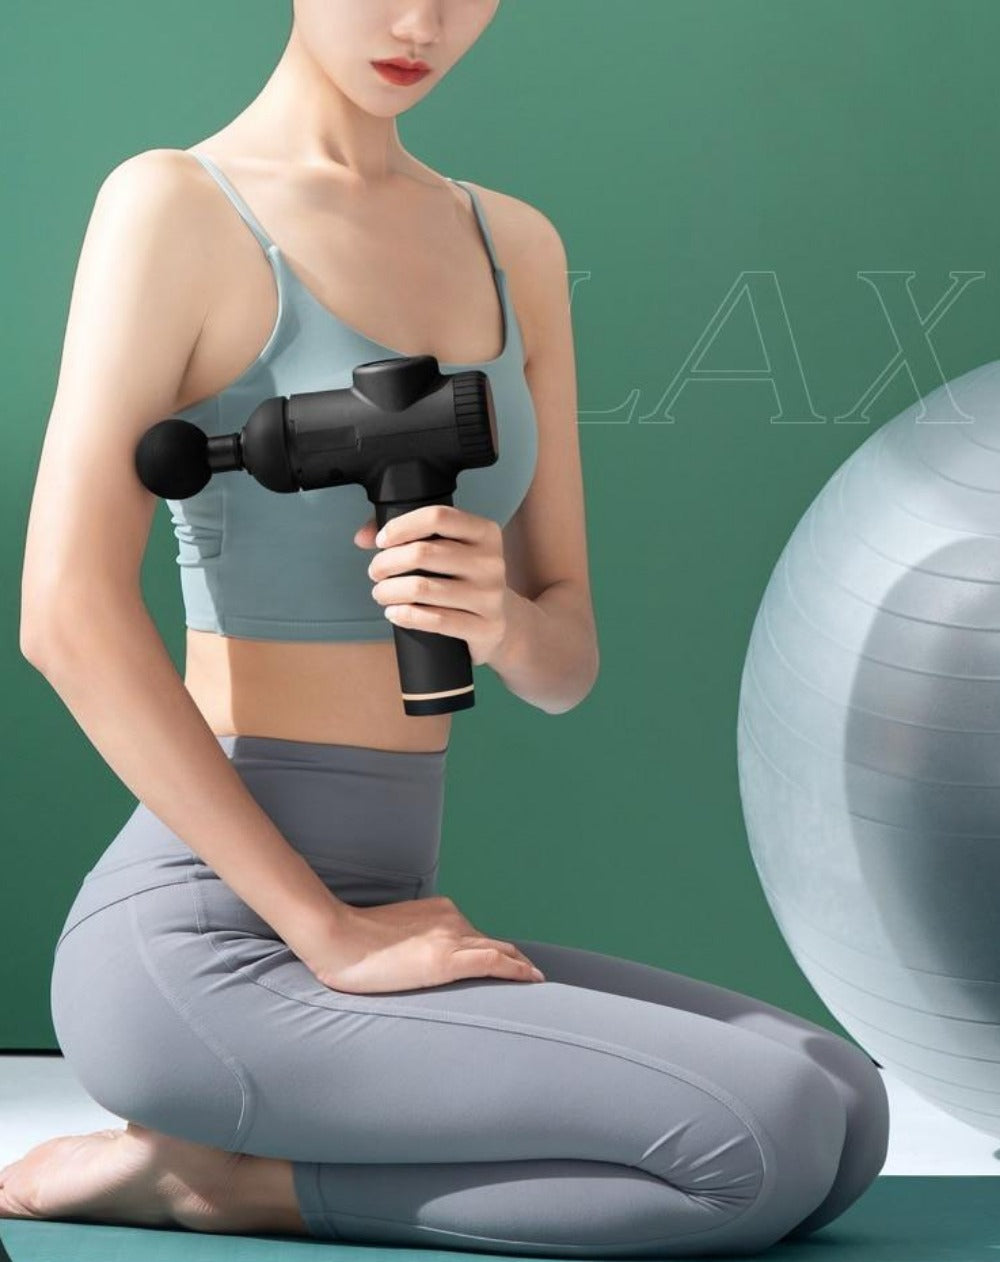 Everyday.Discount buy massager guns pinterest muscles massager guns facebookvs guns brushless shoulders neck foot massagers tiktok youtube videos guns exercising athletes    electrical deep kneadings bodymassager lumber backpains relaxation slimming pain relief reliving relaxes muscles reddit pressure blood circulation massager guns instagram shiatsu  massager guns neckpain tiredness stimulates stretching weightloss everyday free.shipping 